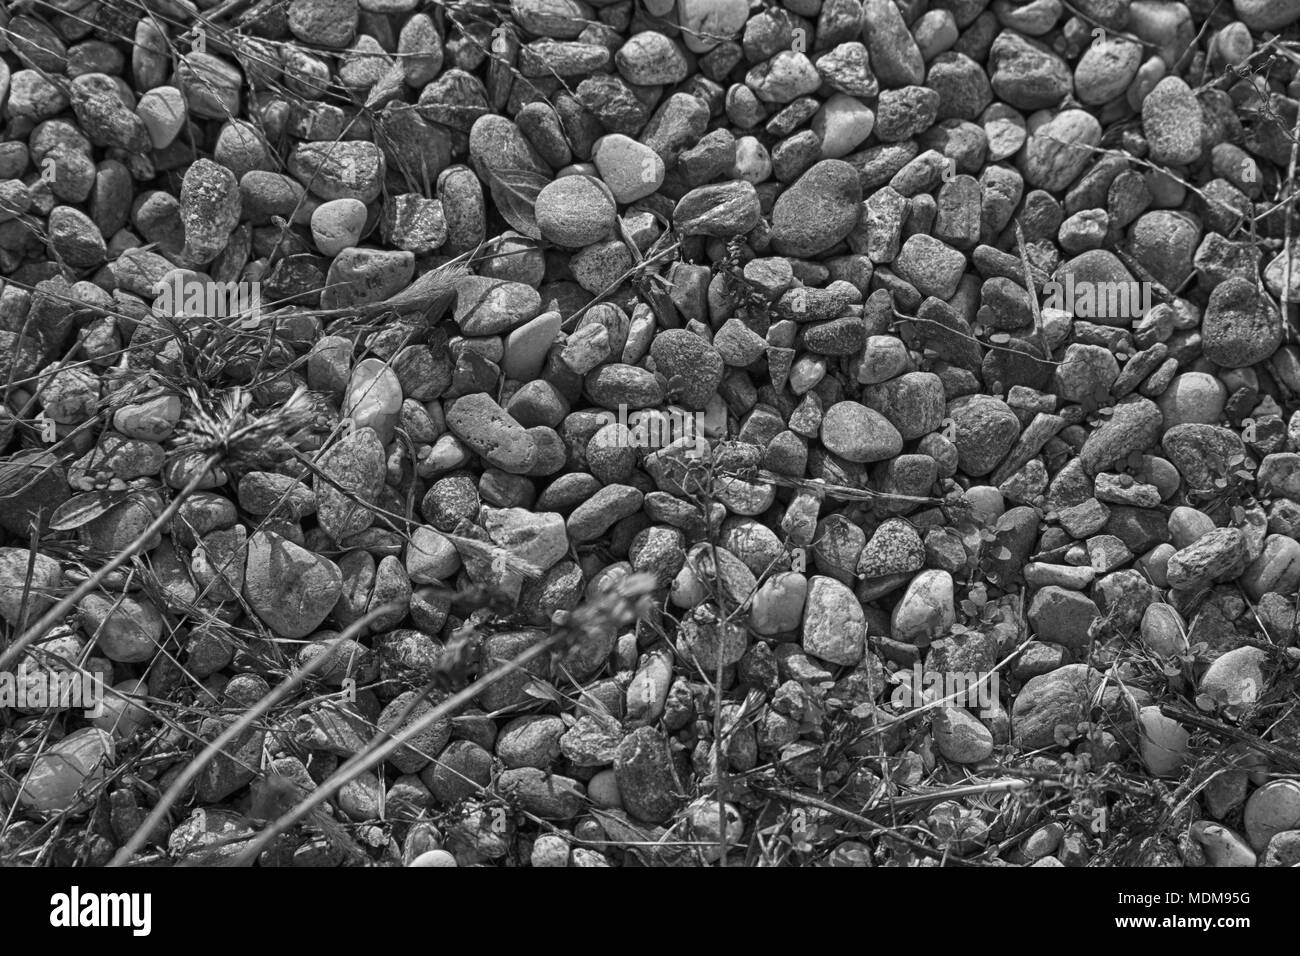 Stone texture, rock surface level, pebble background for web site or mobile devices. Stock Photo